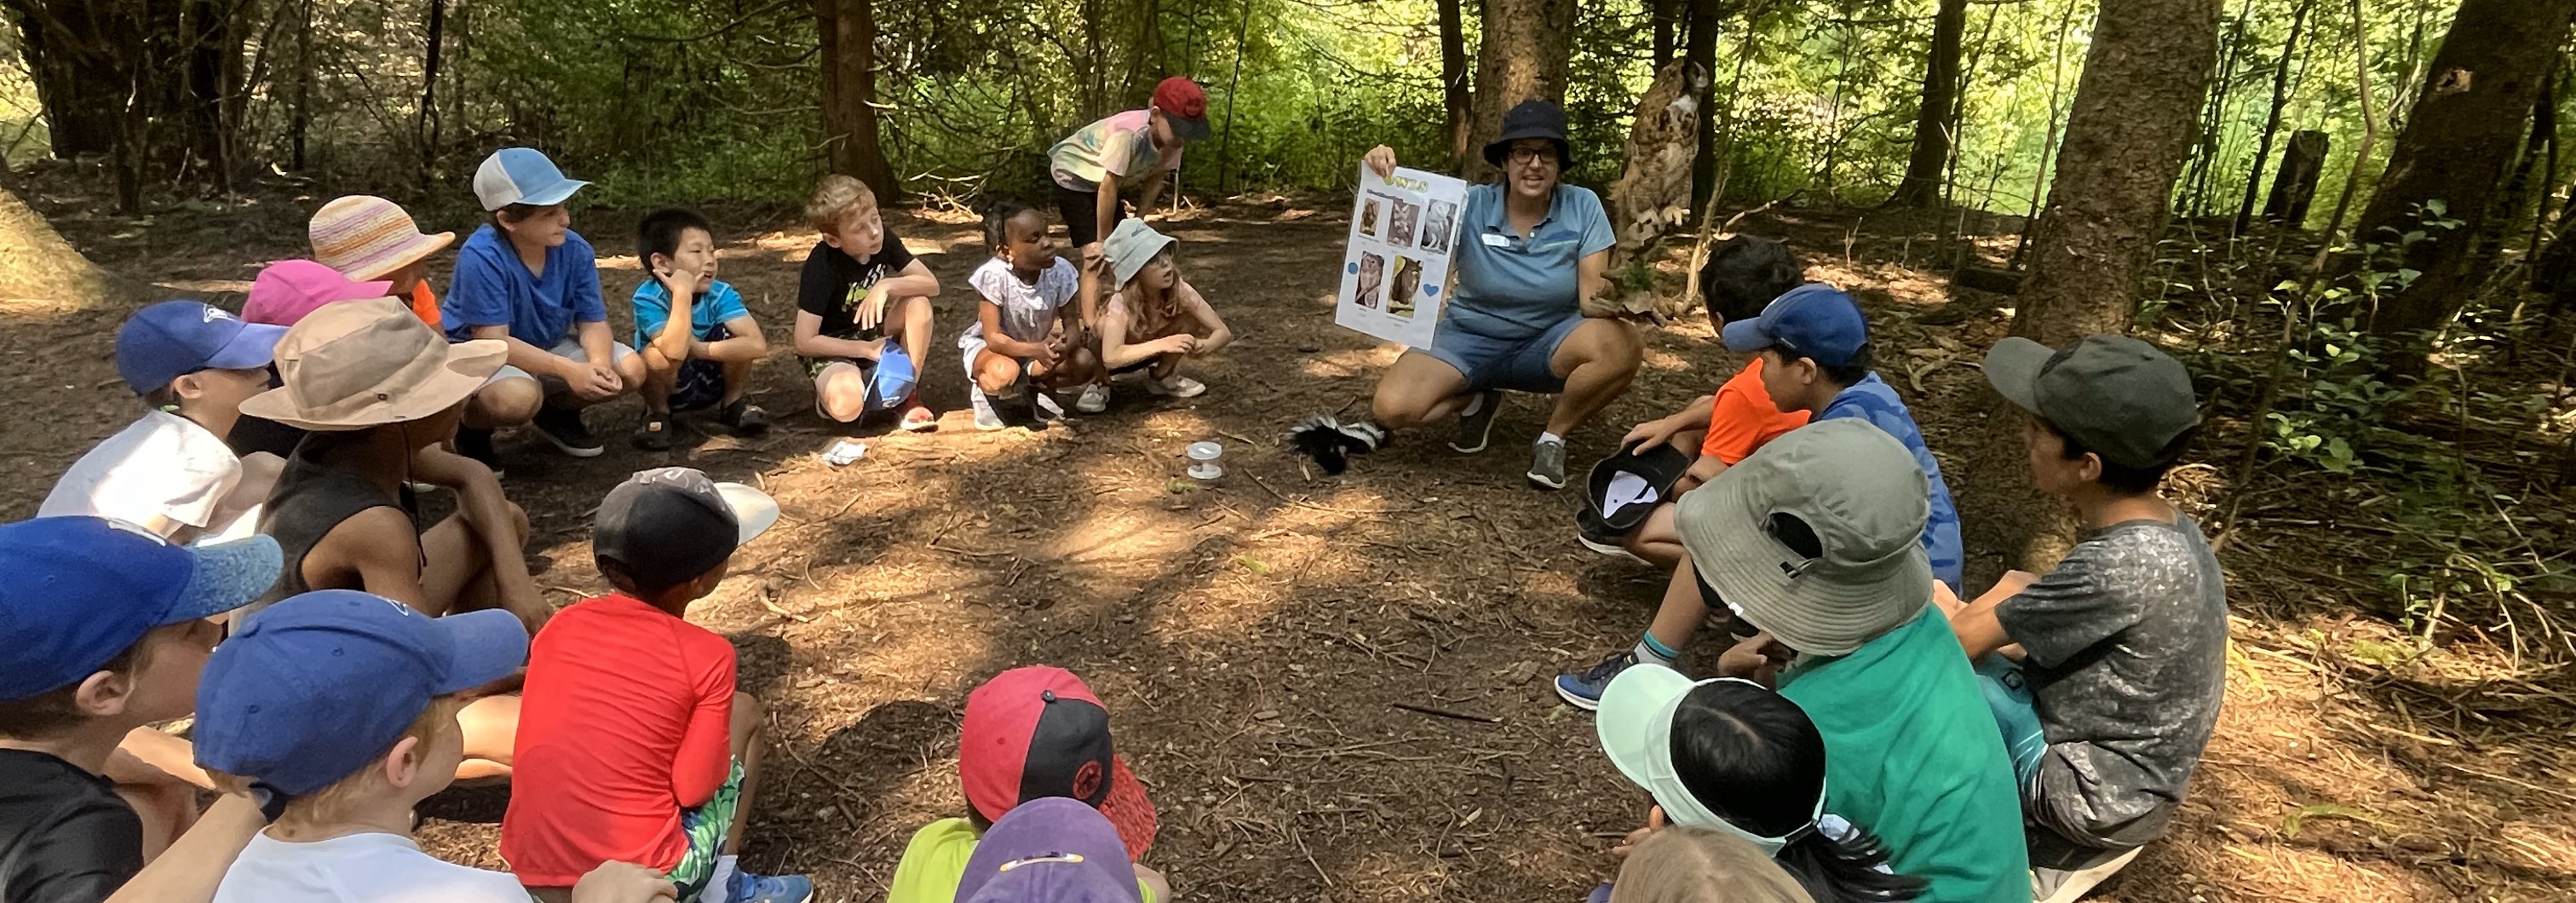 Children from the Junior Forest Rangers at Fairmont Forest Day Camp gather around in a circle in the forest to look at an adult holding a sign about insects.